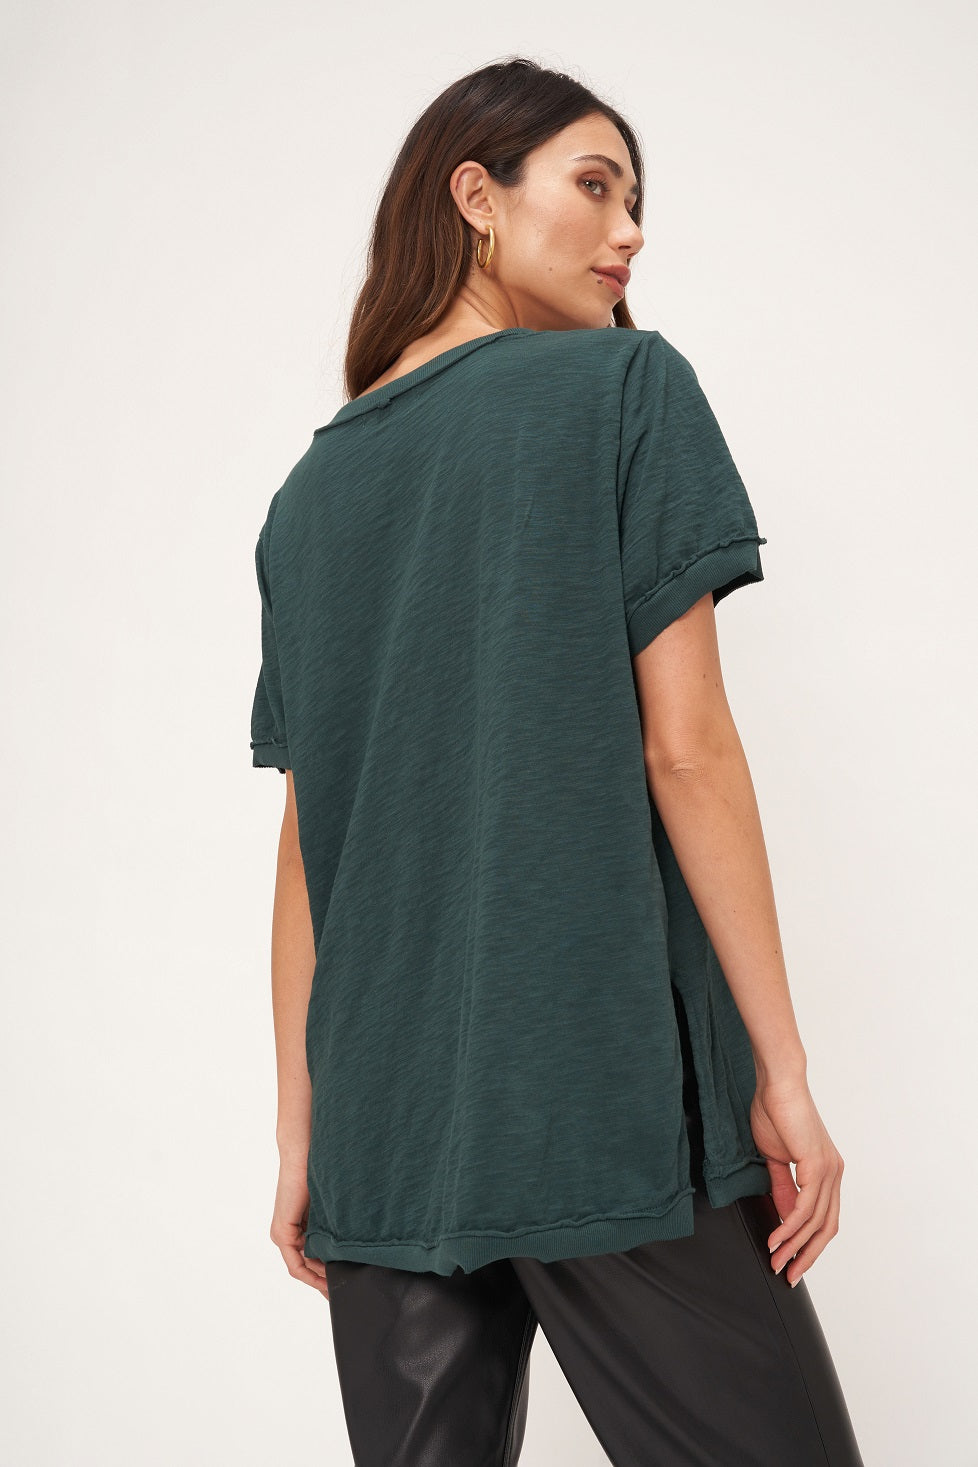 KNOCK OUT V NECK TEE - SPRUCE MOONLIGHT - Kingfisher Road - Online Boutique